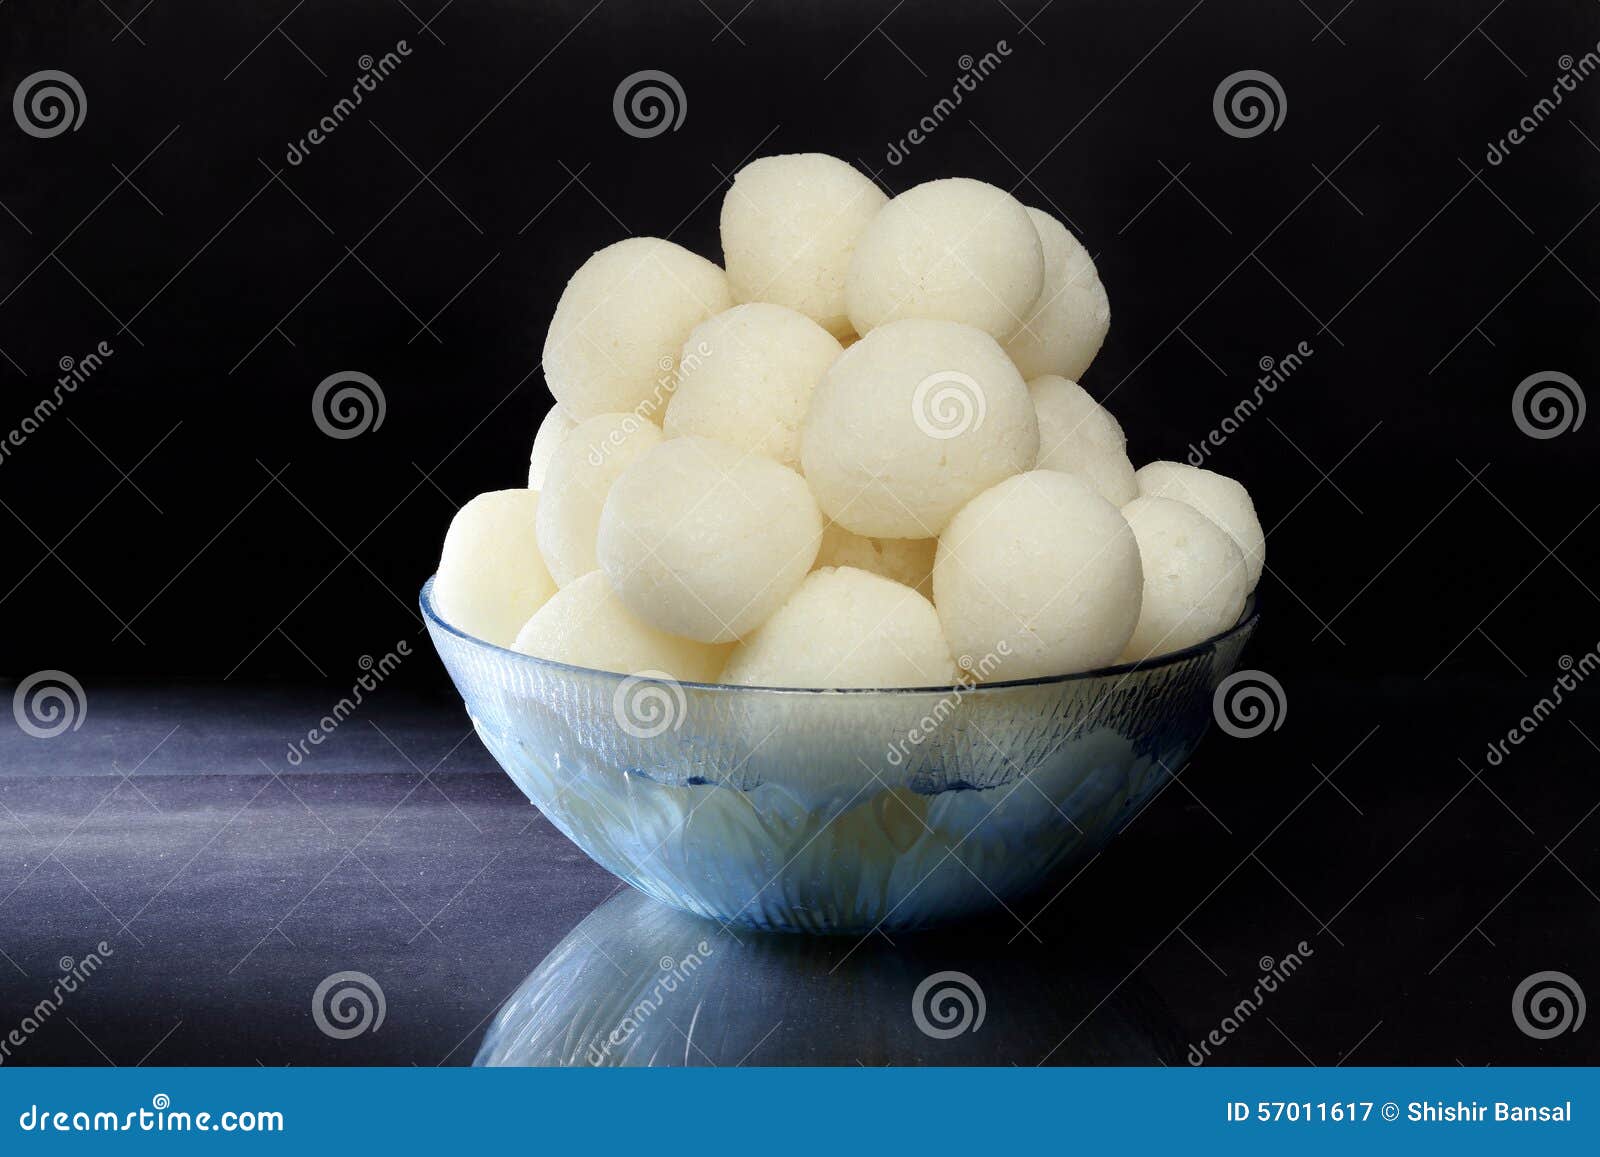 rasgulla - an indian sweet made from khoya, soft and spongy